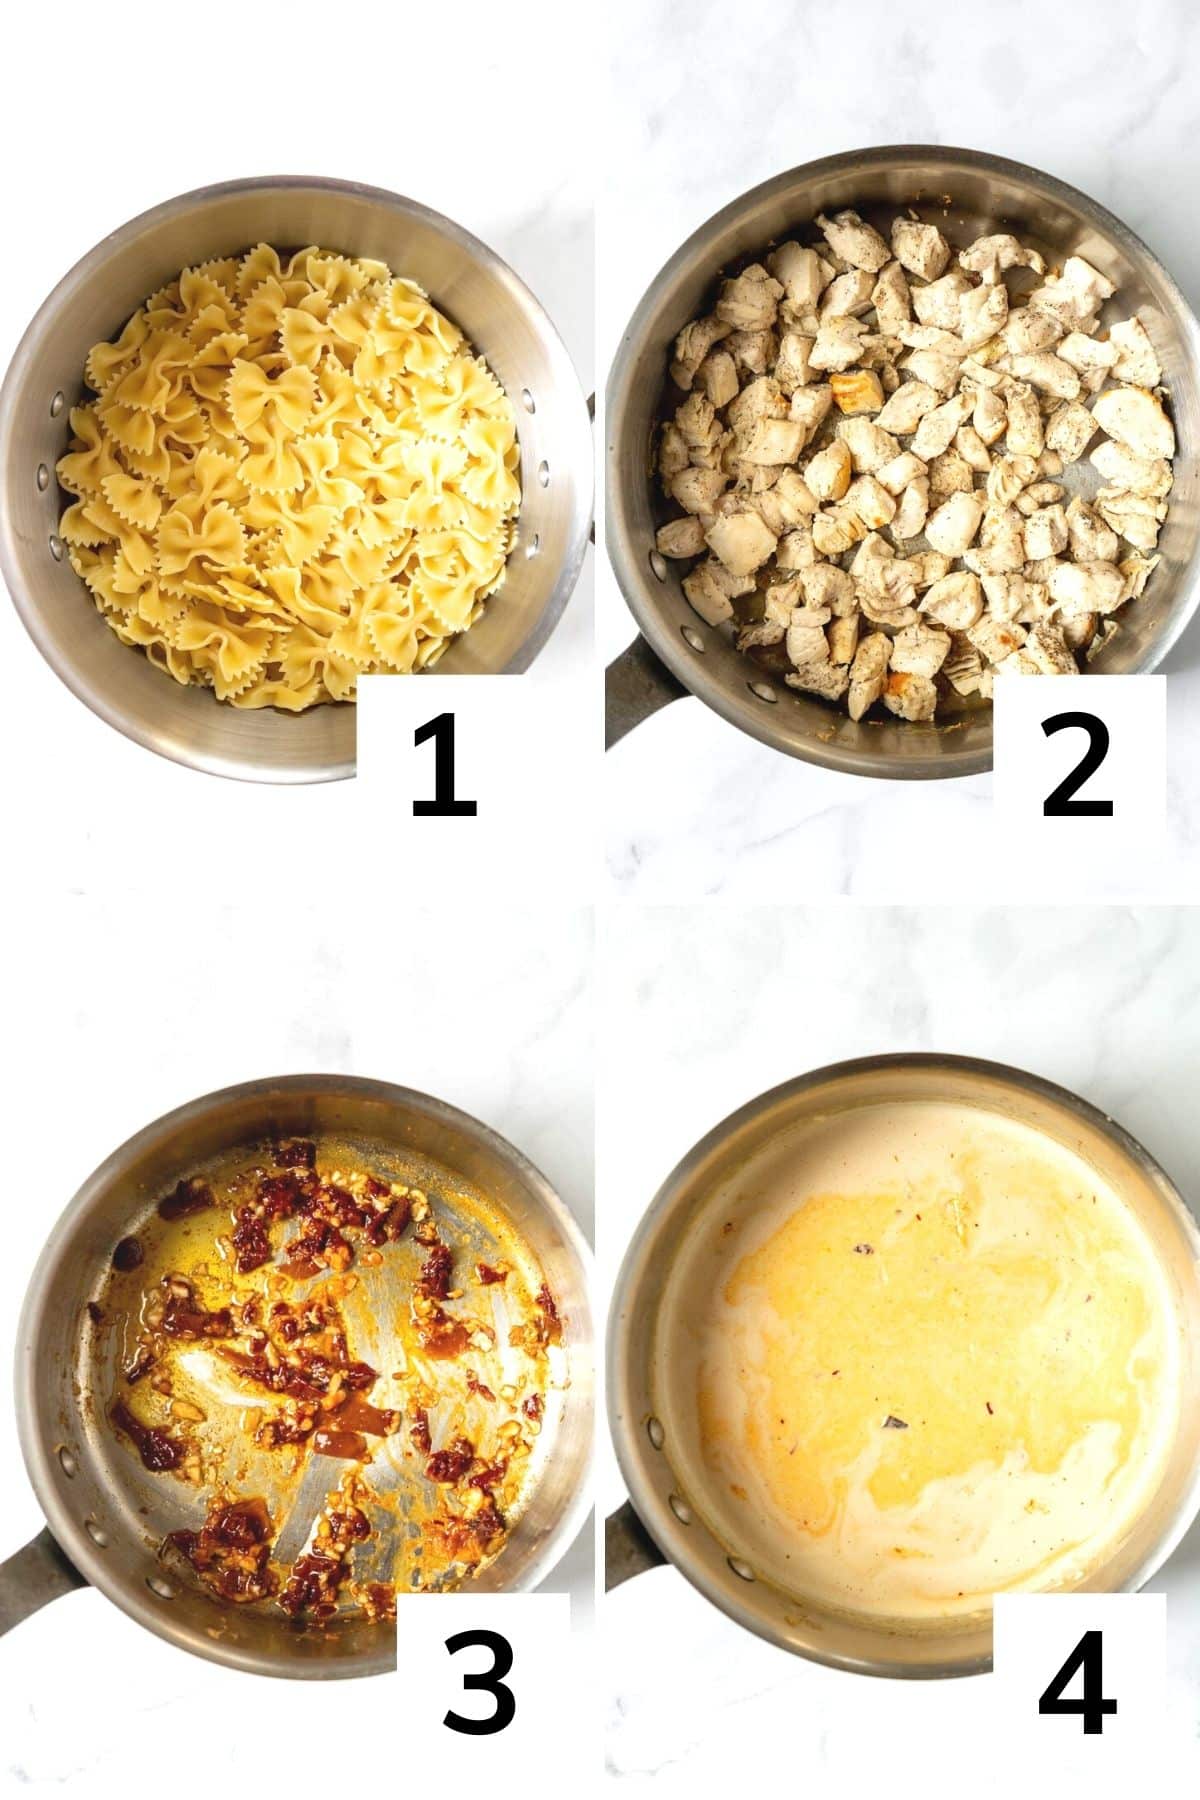 How to make chicken pasta with chipotle cream sauce step by step